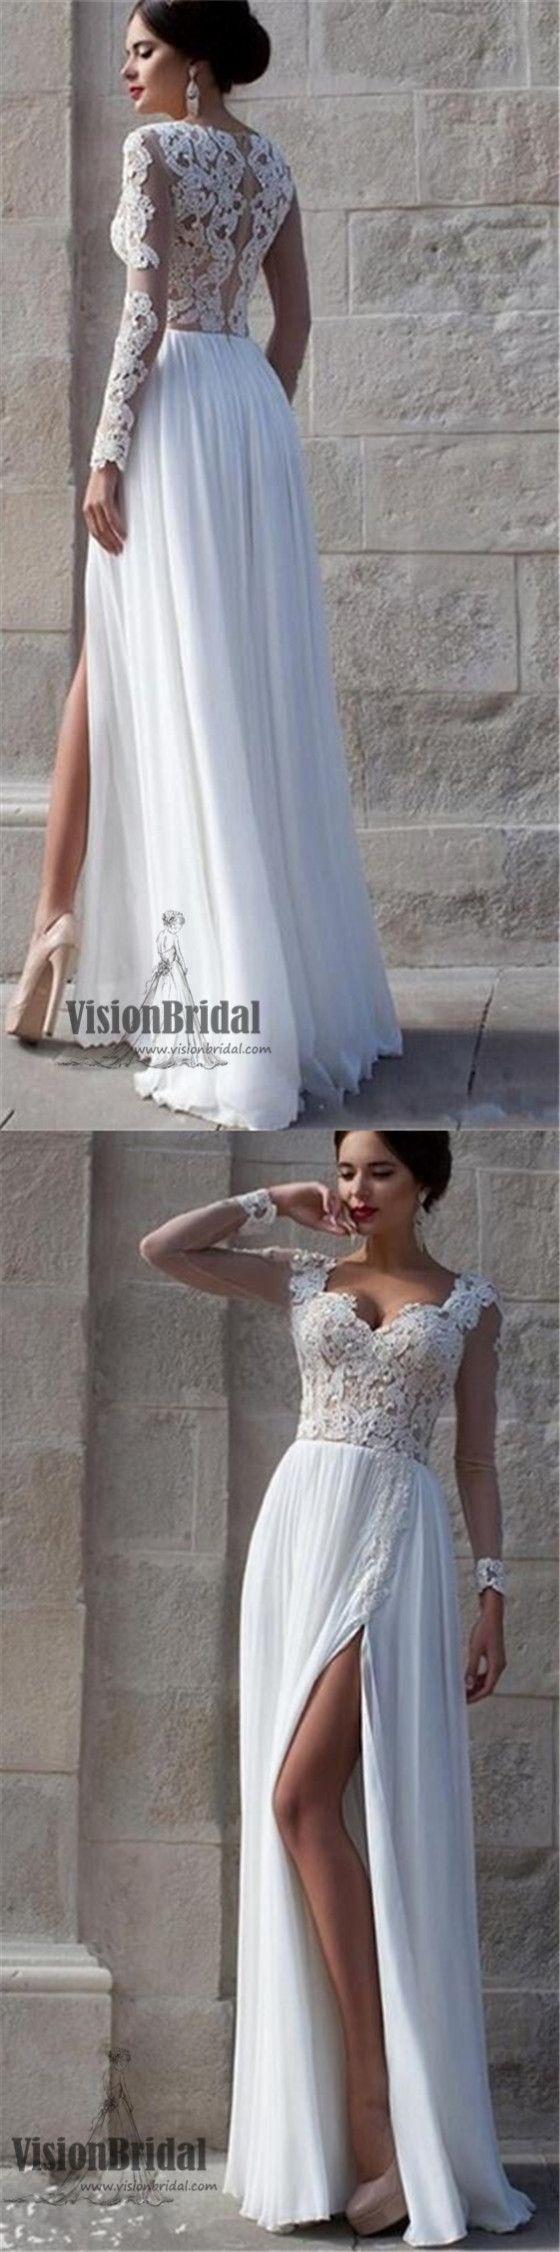 Wedding - Top See Through White Sweetheart Lace Tulle Prom Dress, Long Sleeves Side Slit Charming Prom Dress, Prom Dresses, VB0202